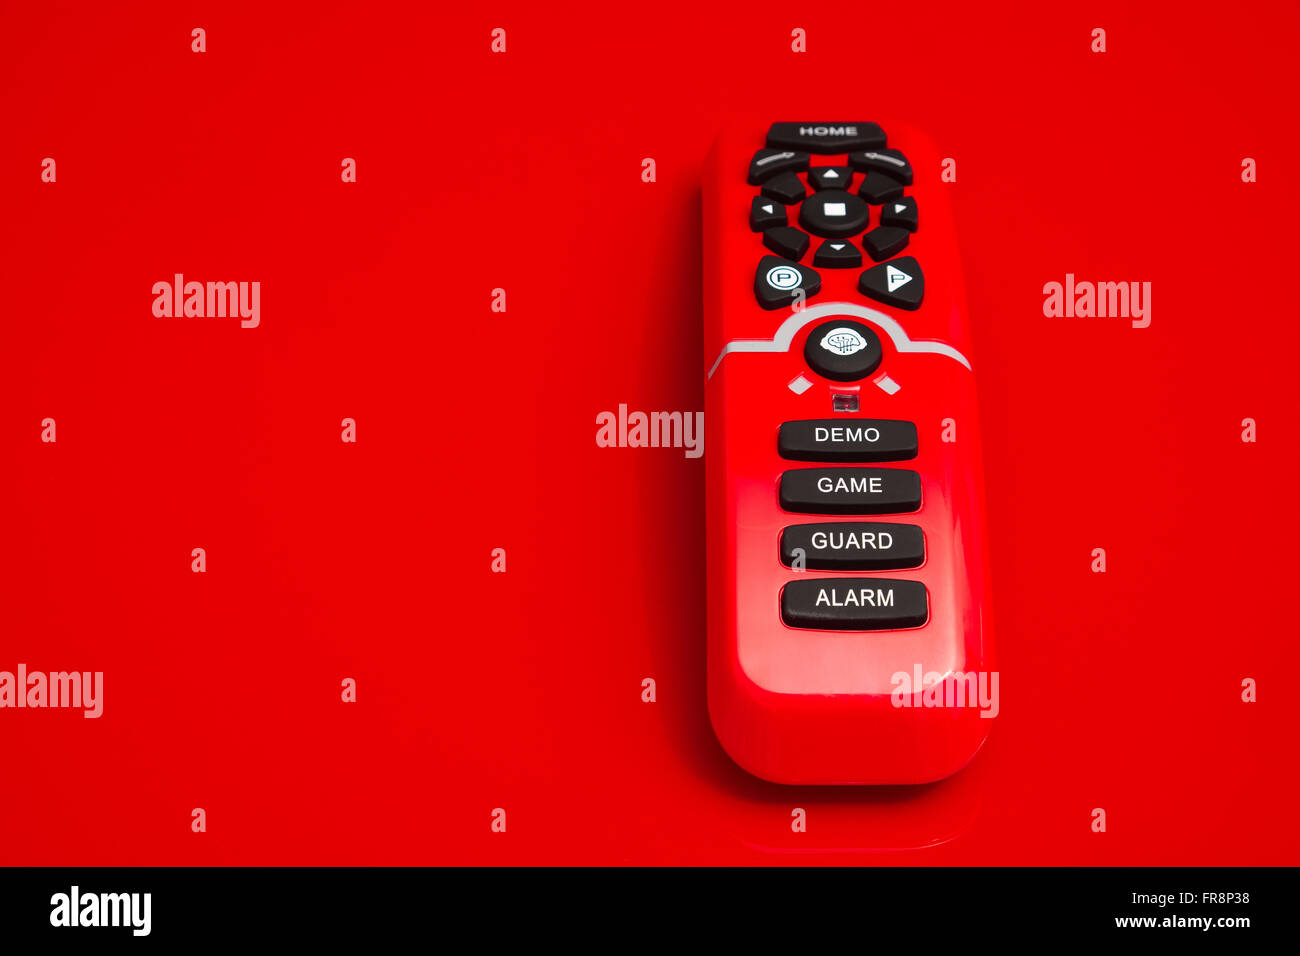 remote control with black rubber buttons with the text demo, game, guard and alarm printed on Stock Photo